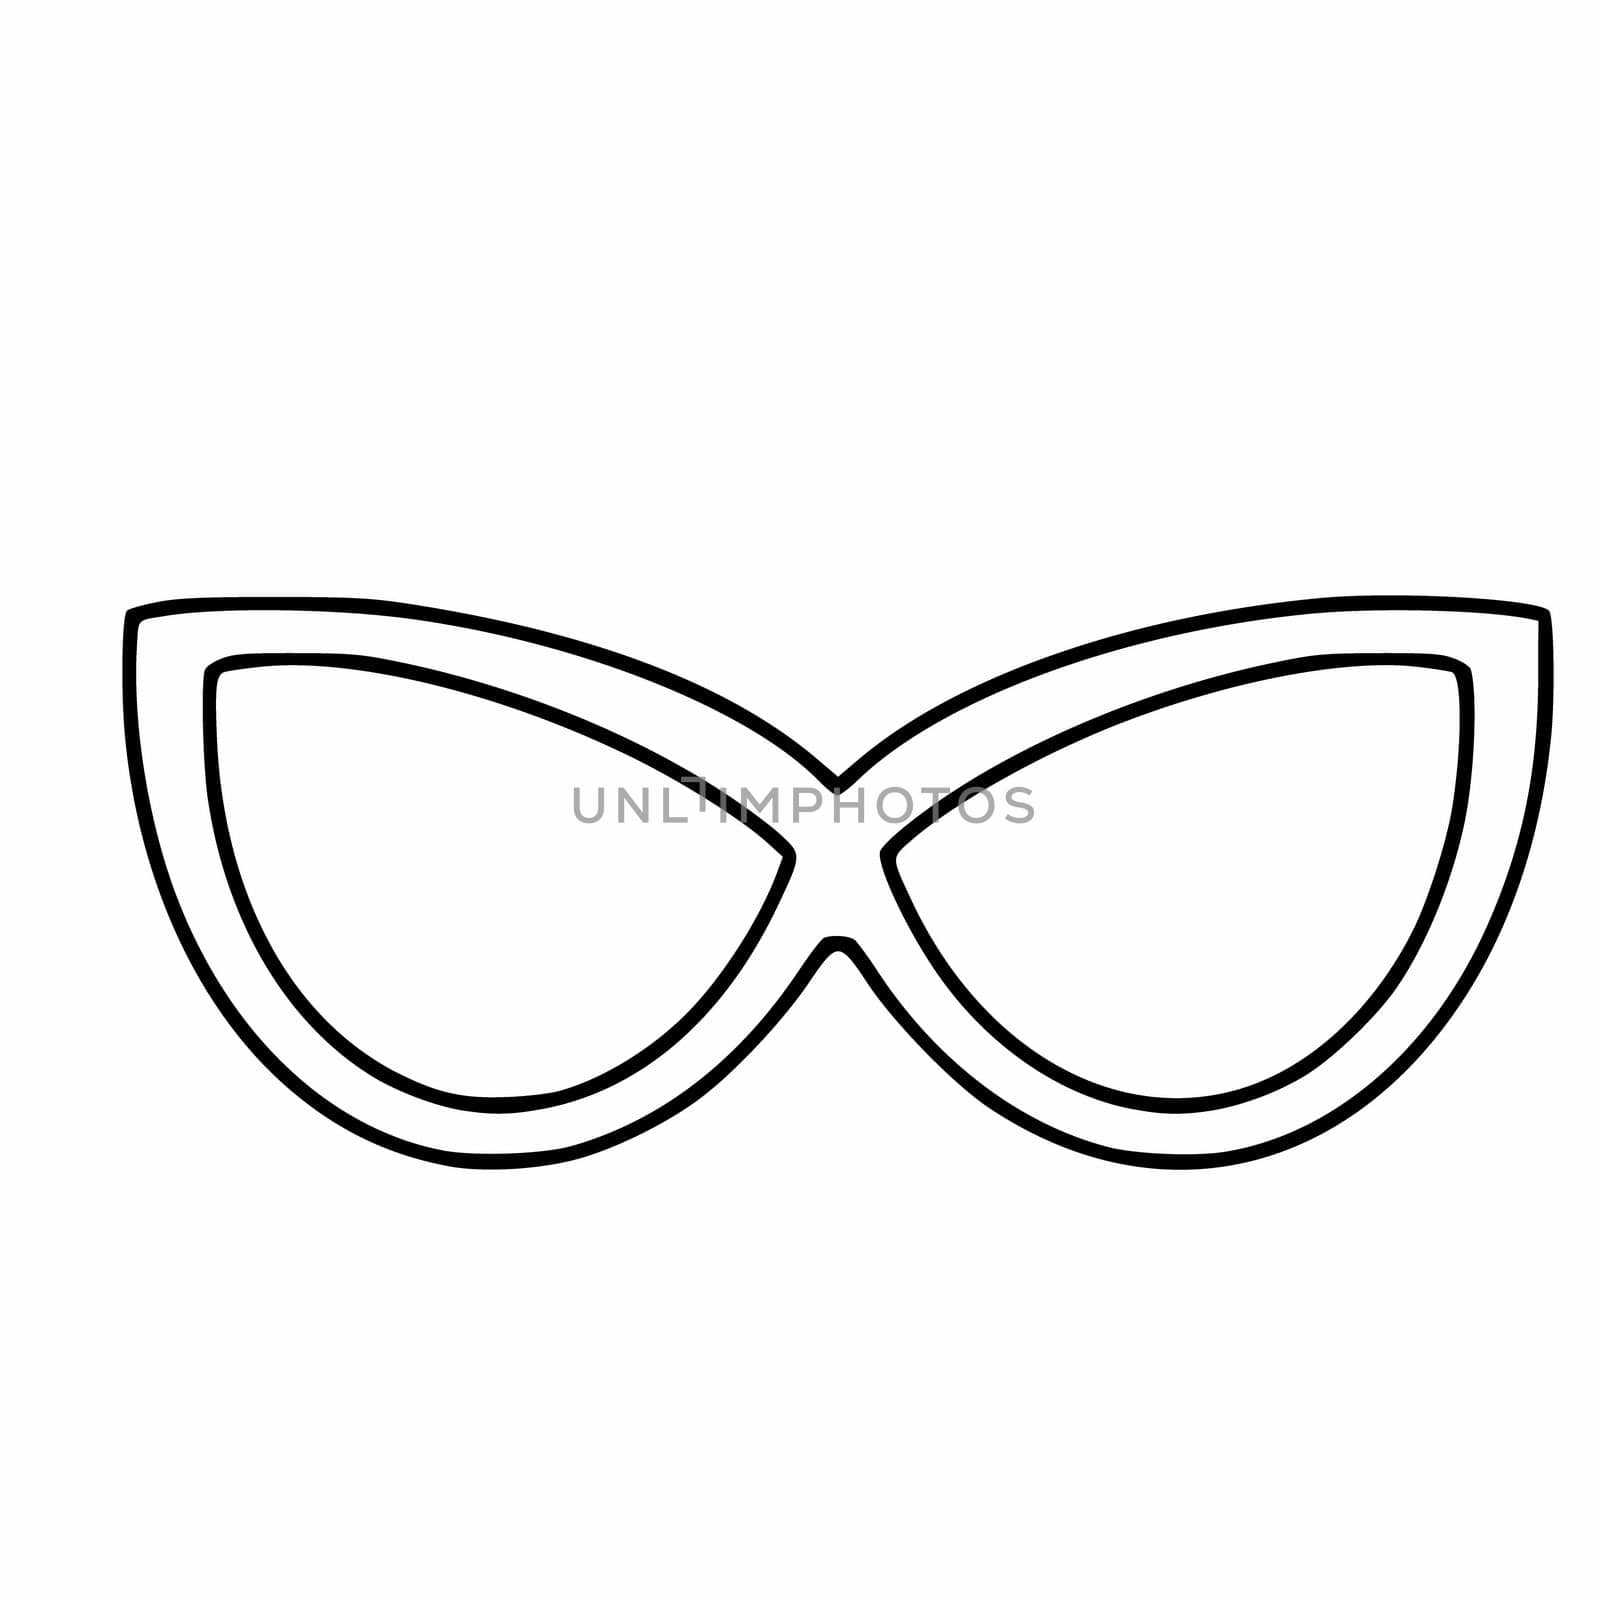 Doodle-style sunglasses. Fashionable glasses for vision. by polinka_art